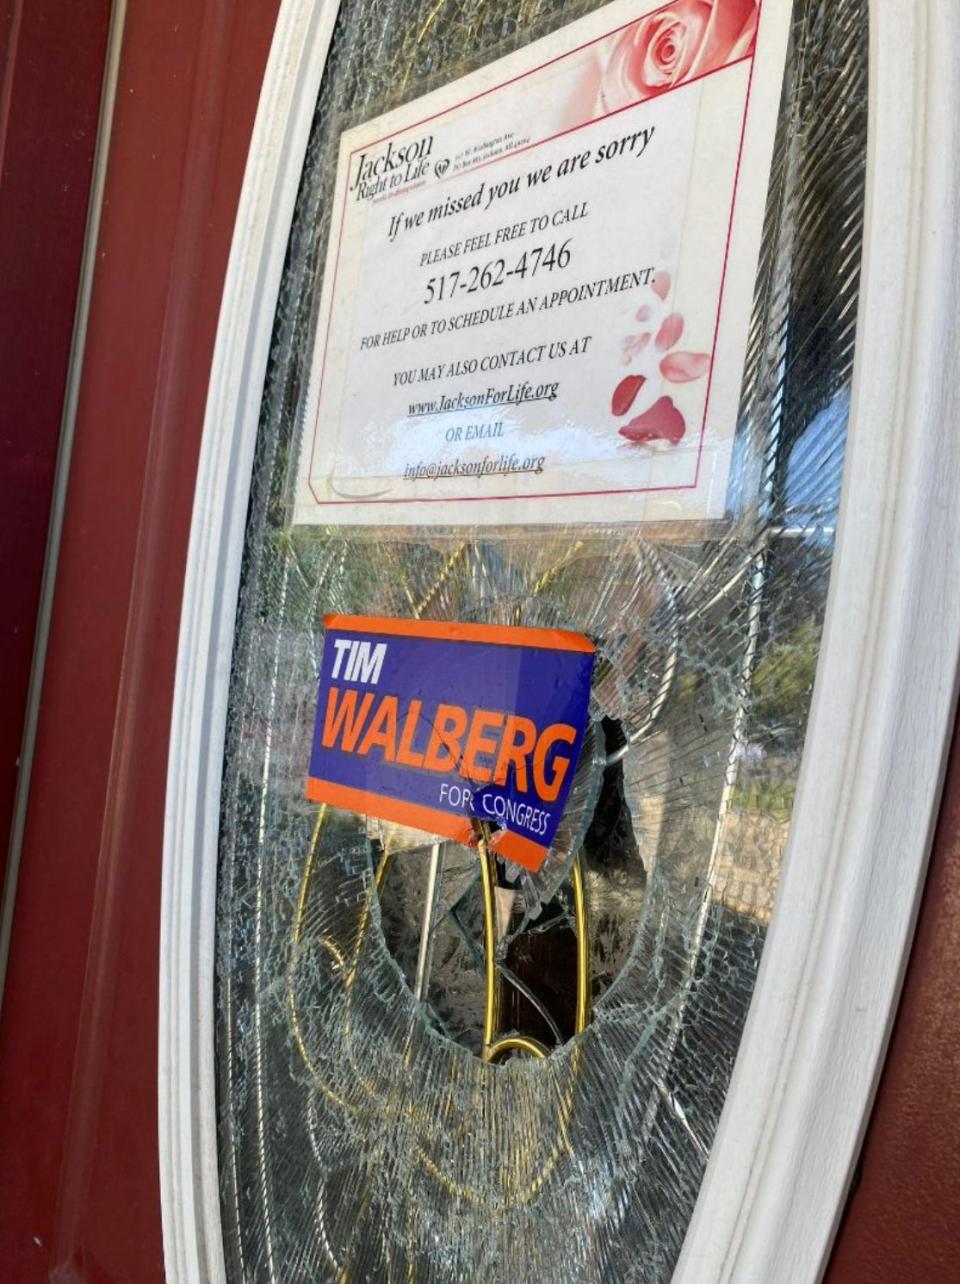 A smashed window in the door to an office in Jackson shared by Jackson Right to Life and U.S. Rep. Tim Walberg's reelection campaign is pictured.